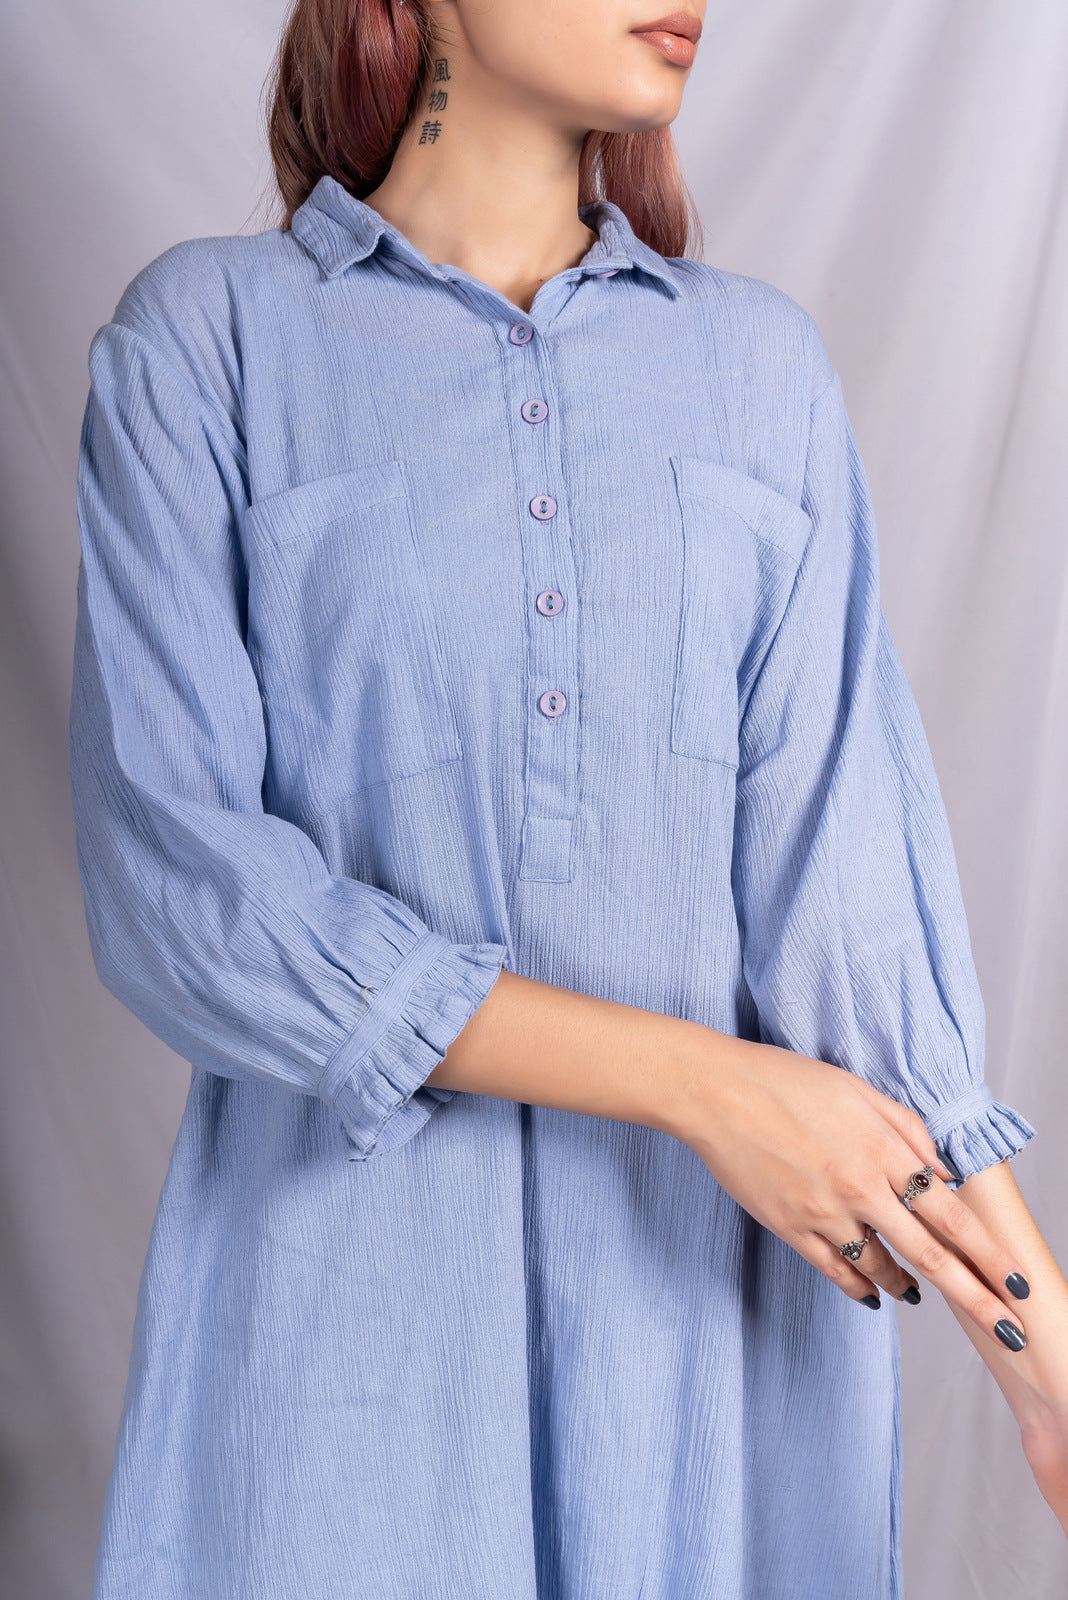 Blue crinkled high low tunic